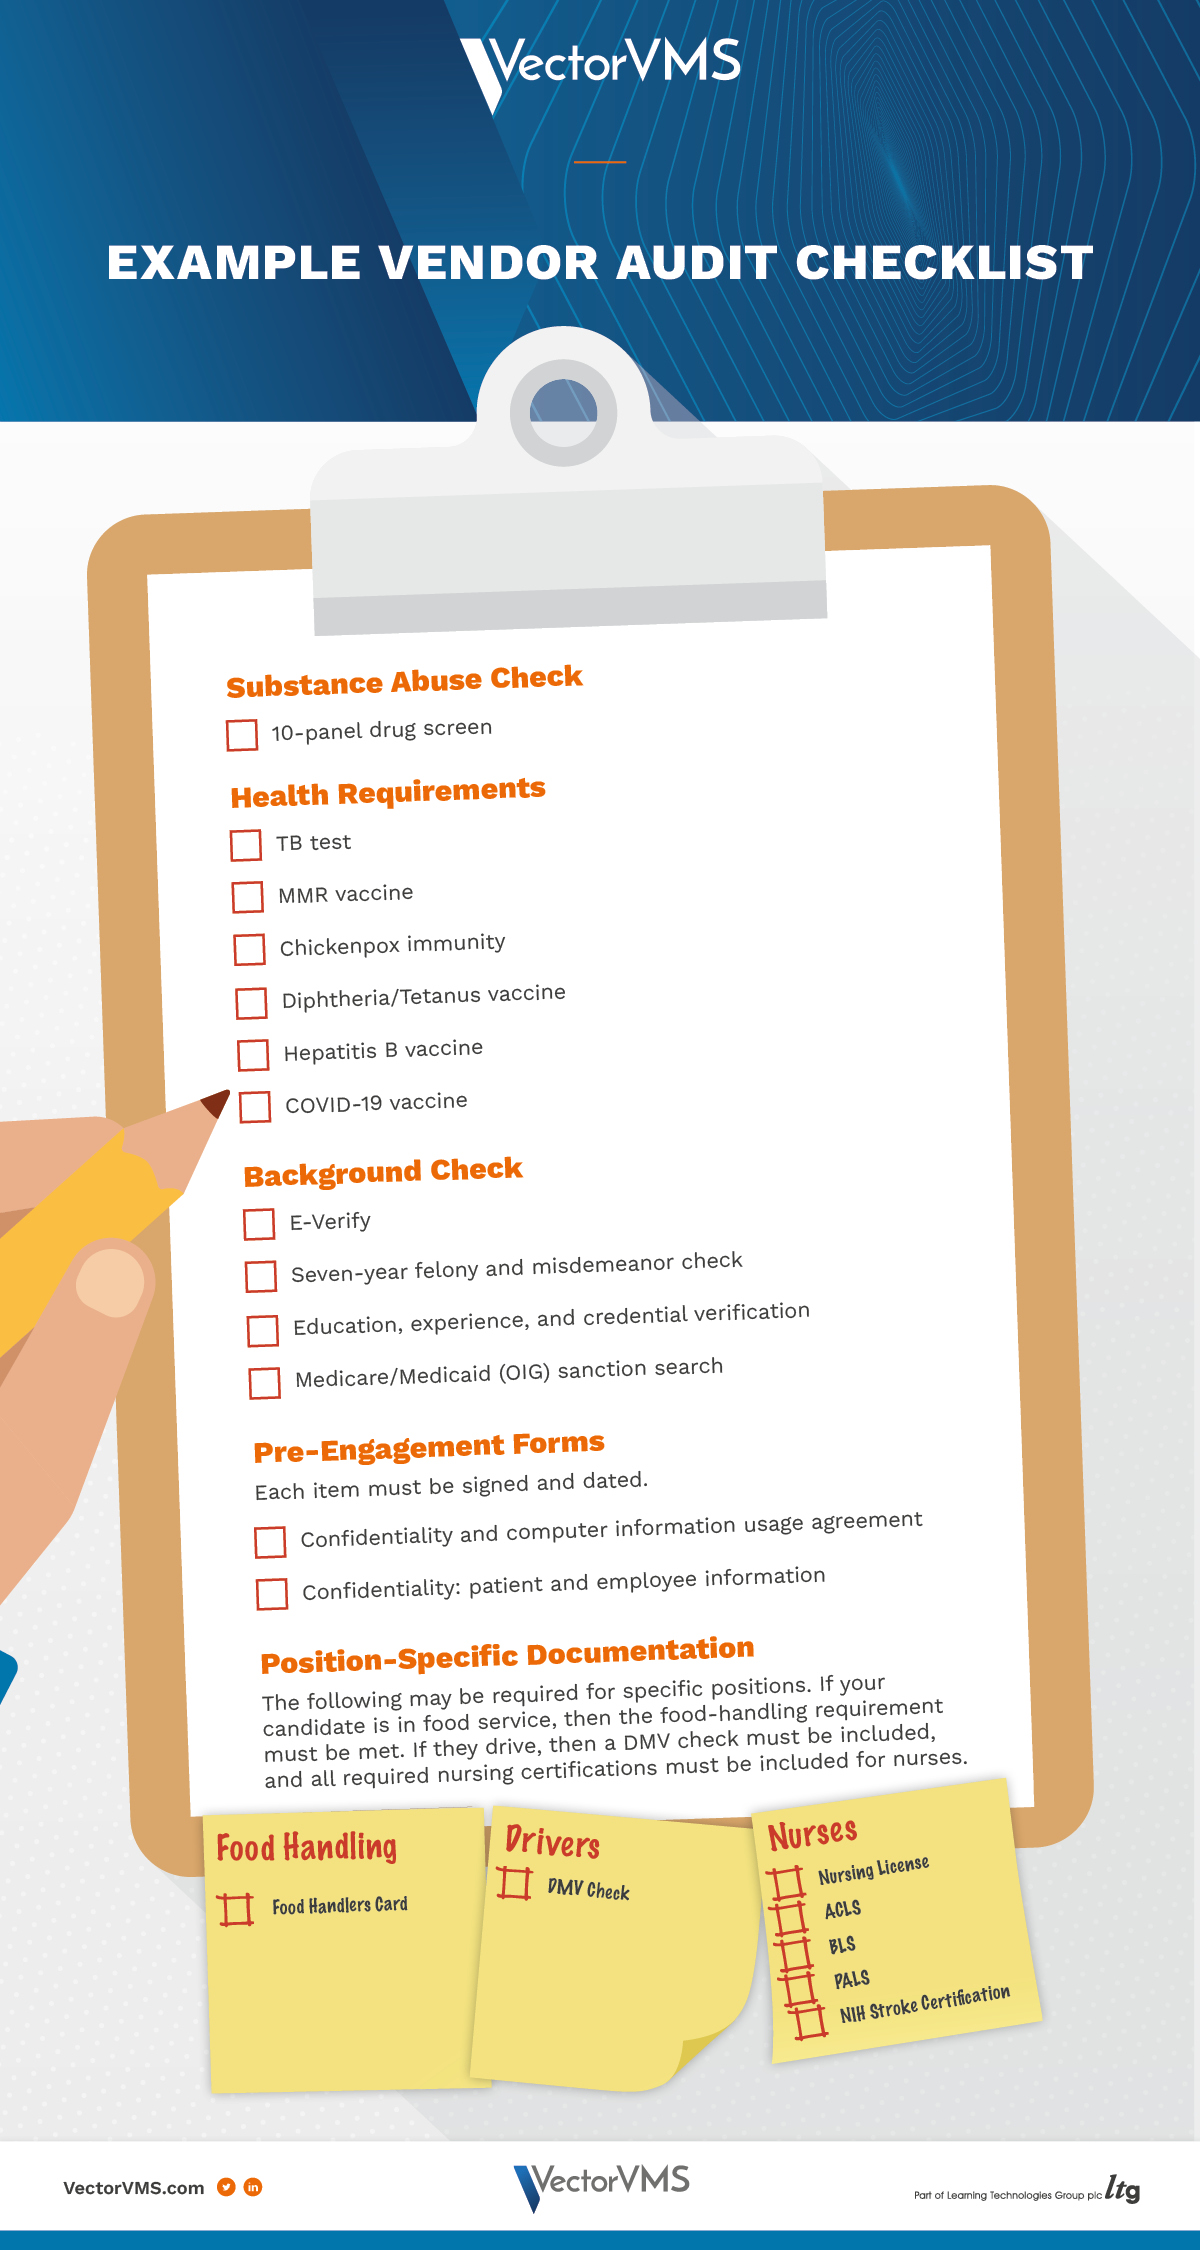 checklist with requirements you need when conducting vendor audits